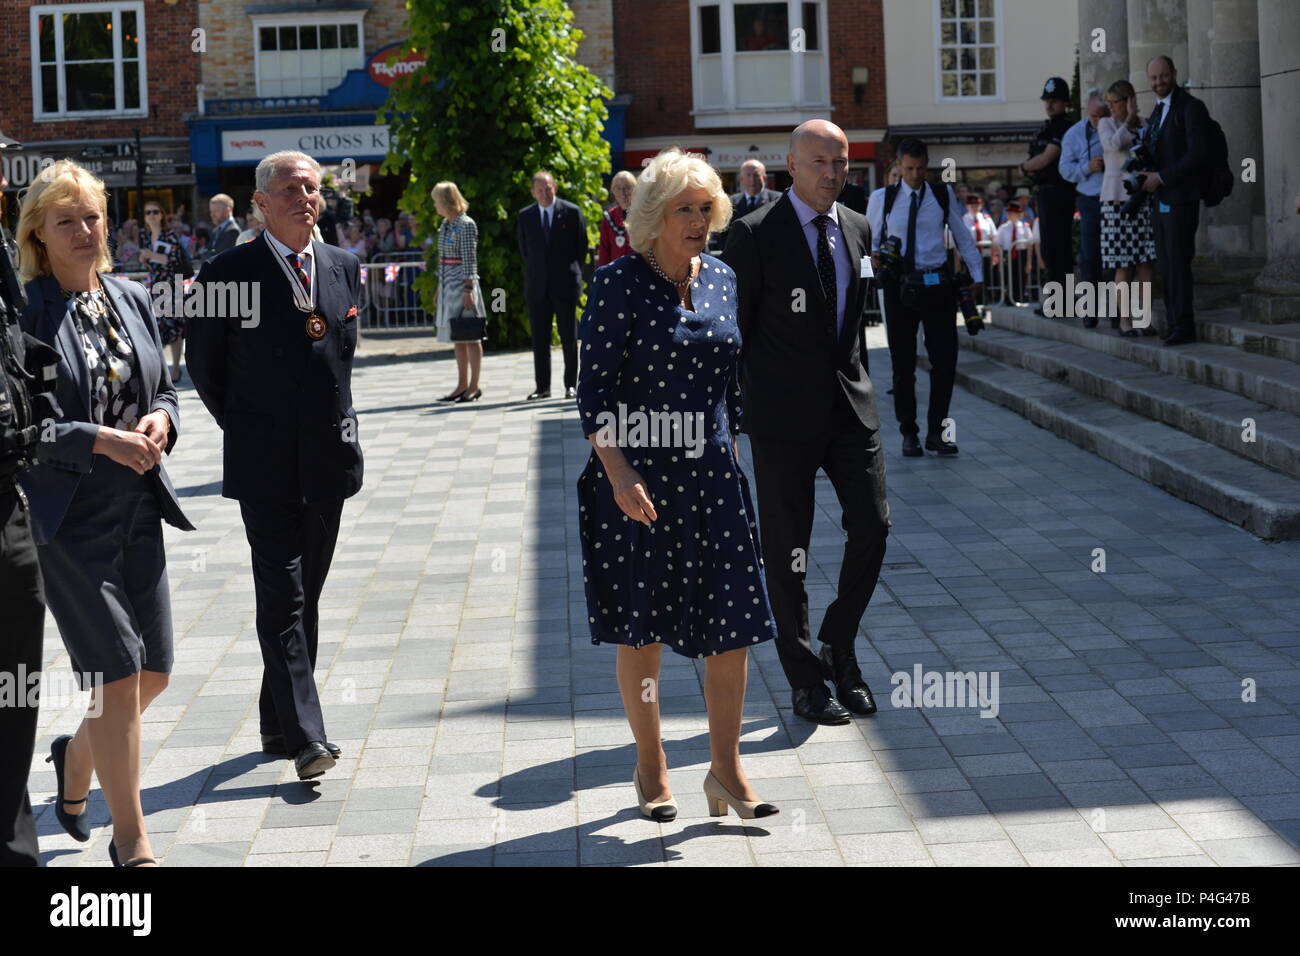 Salisbury, Wiltshire, UK, 22nd June 2018. Camilla, Duchess of Cornwall in the Market Square. The royal couple are on a visit to Salisbury to support the city’s recovery where visitor numbers have fallen and businesses suffered after the nerve agent attack on former Russian spy Sergei Skripal and his daughter Yulia on March 4th 2018. Stock Photo